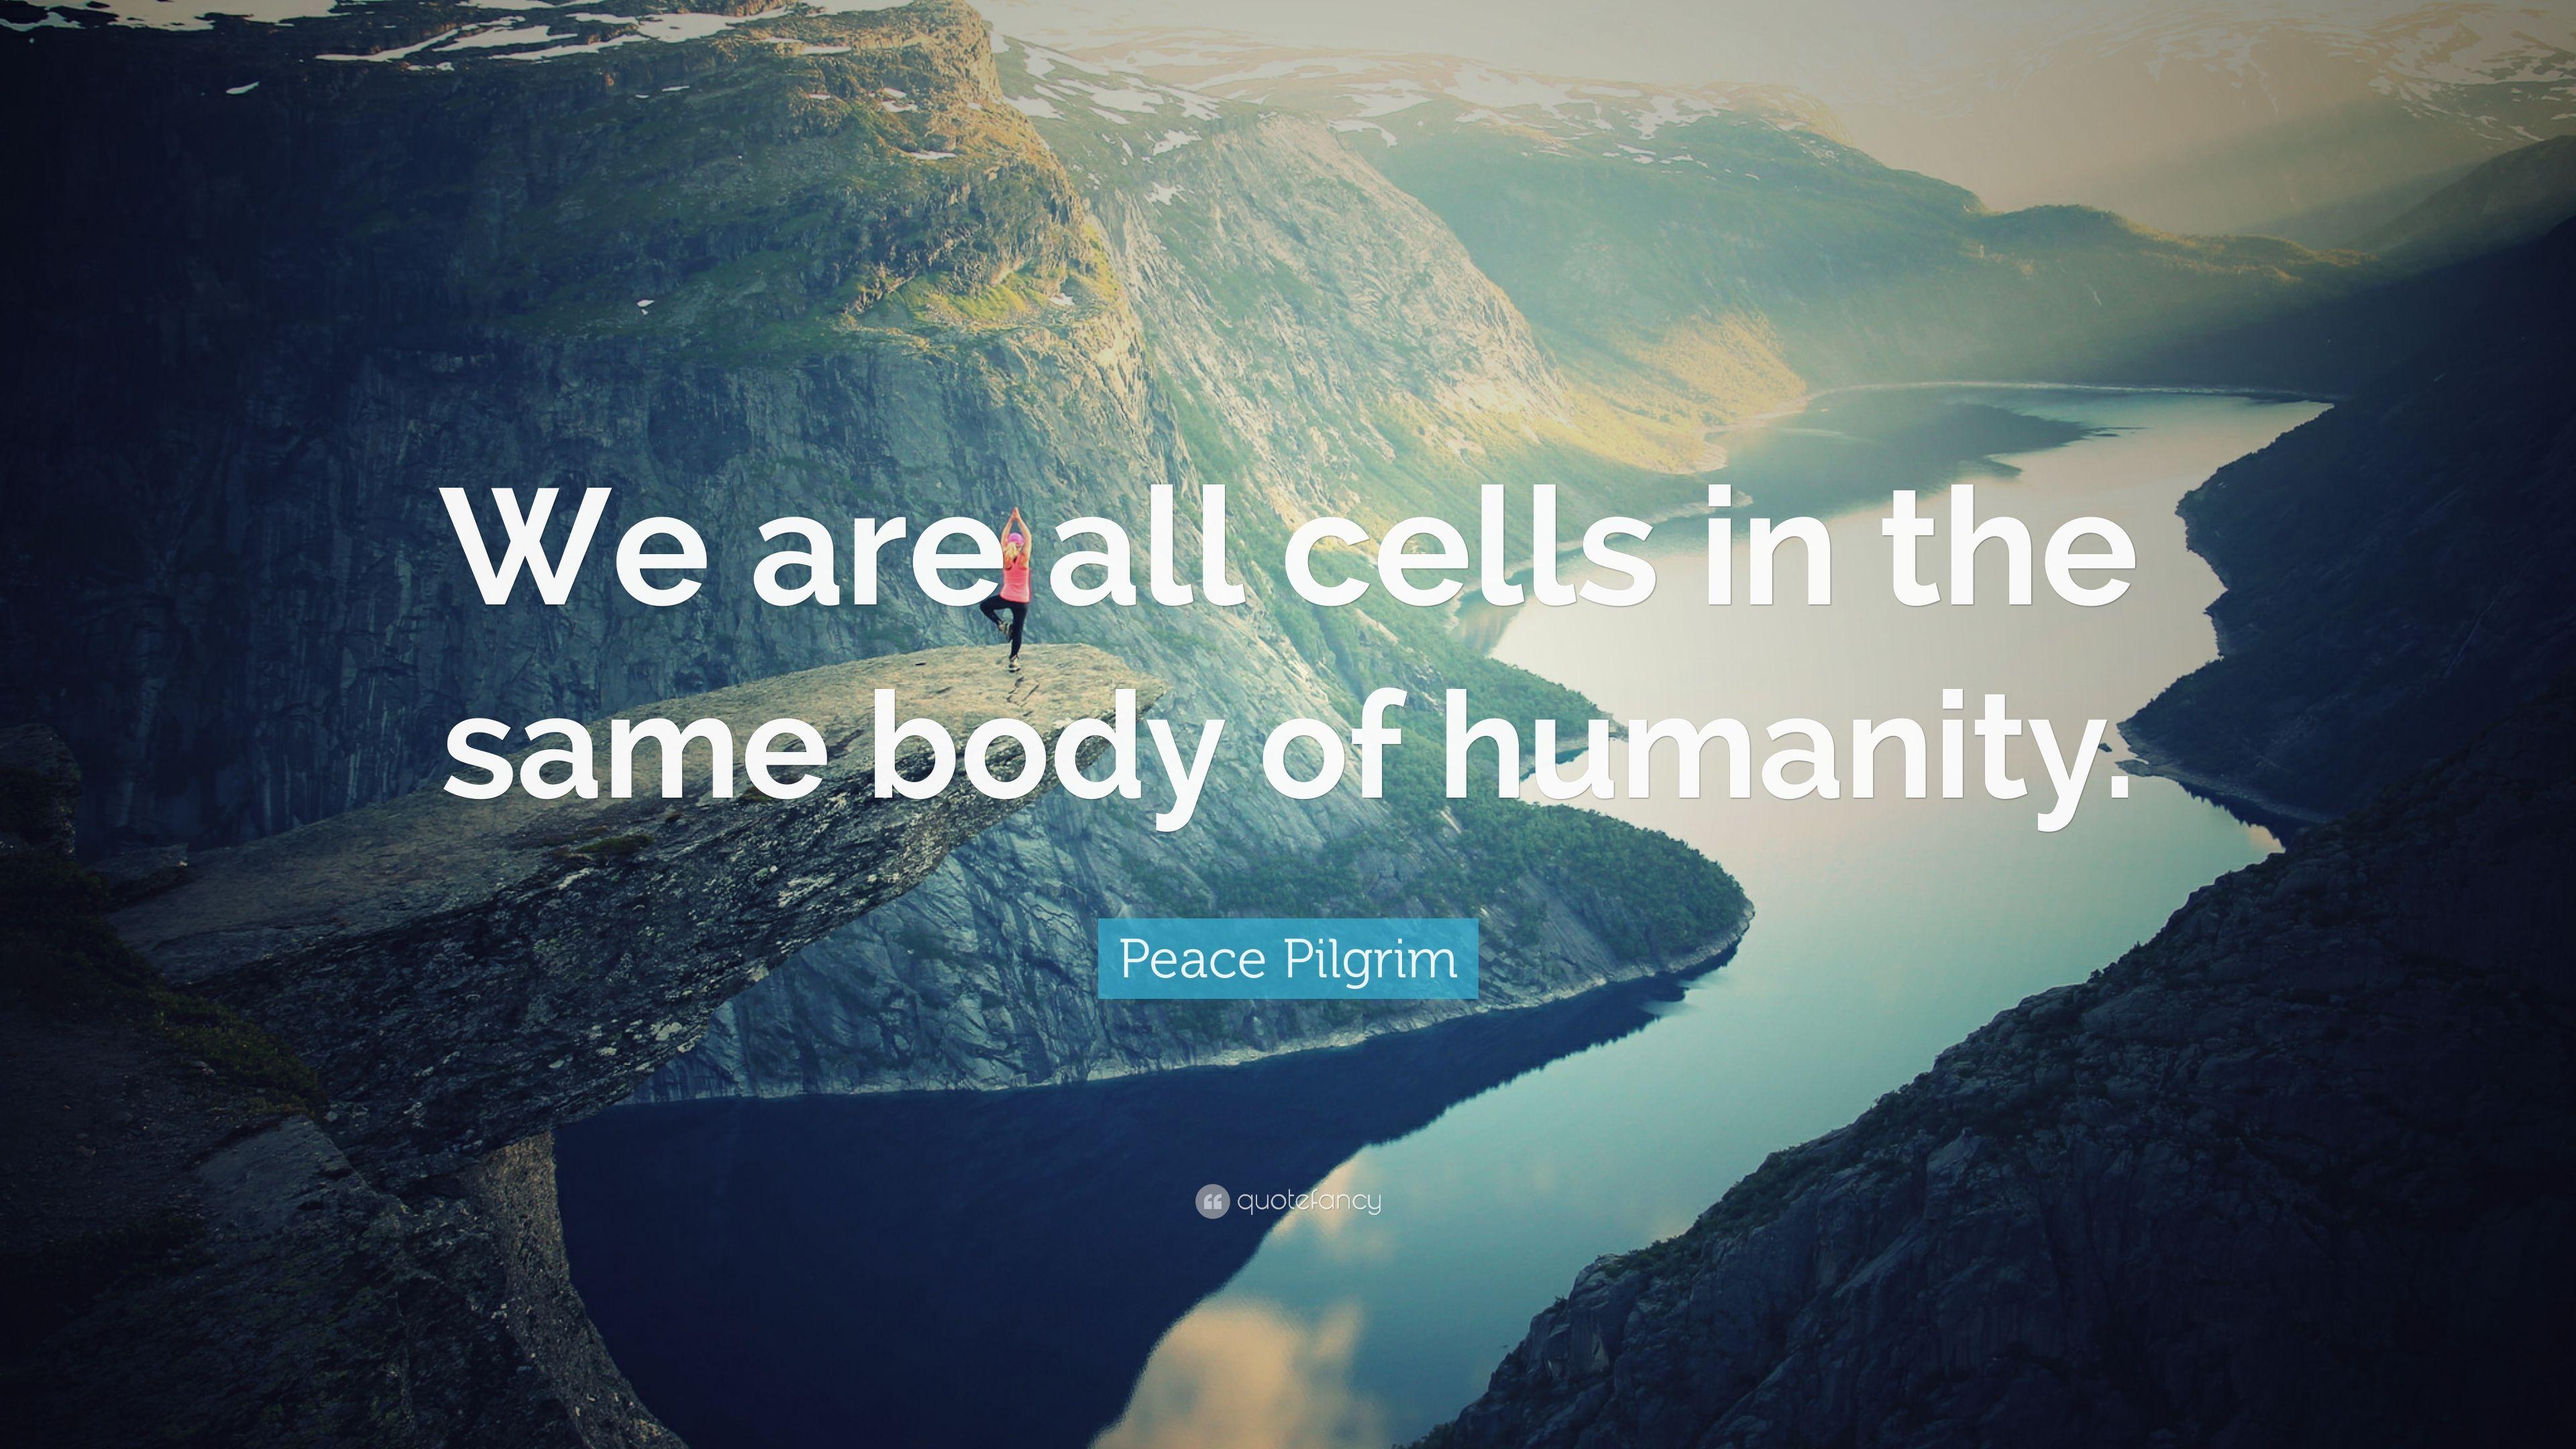 Peace Pilgrim Quote: “We are all cells in the same body